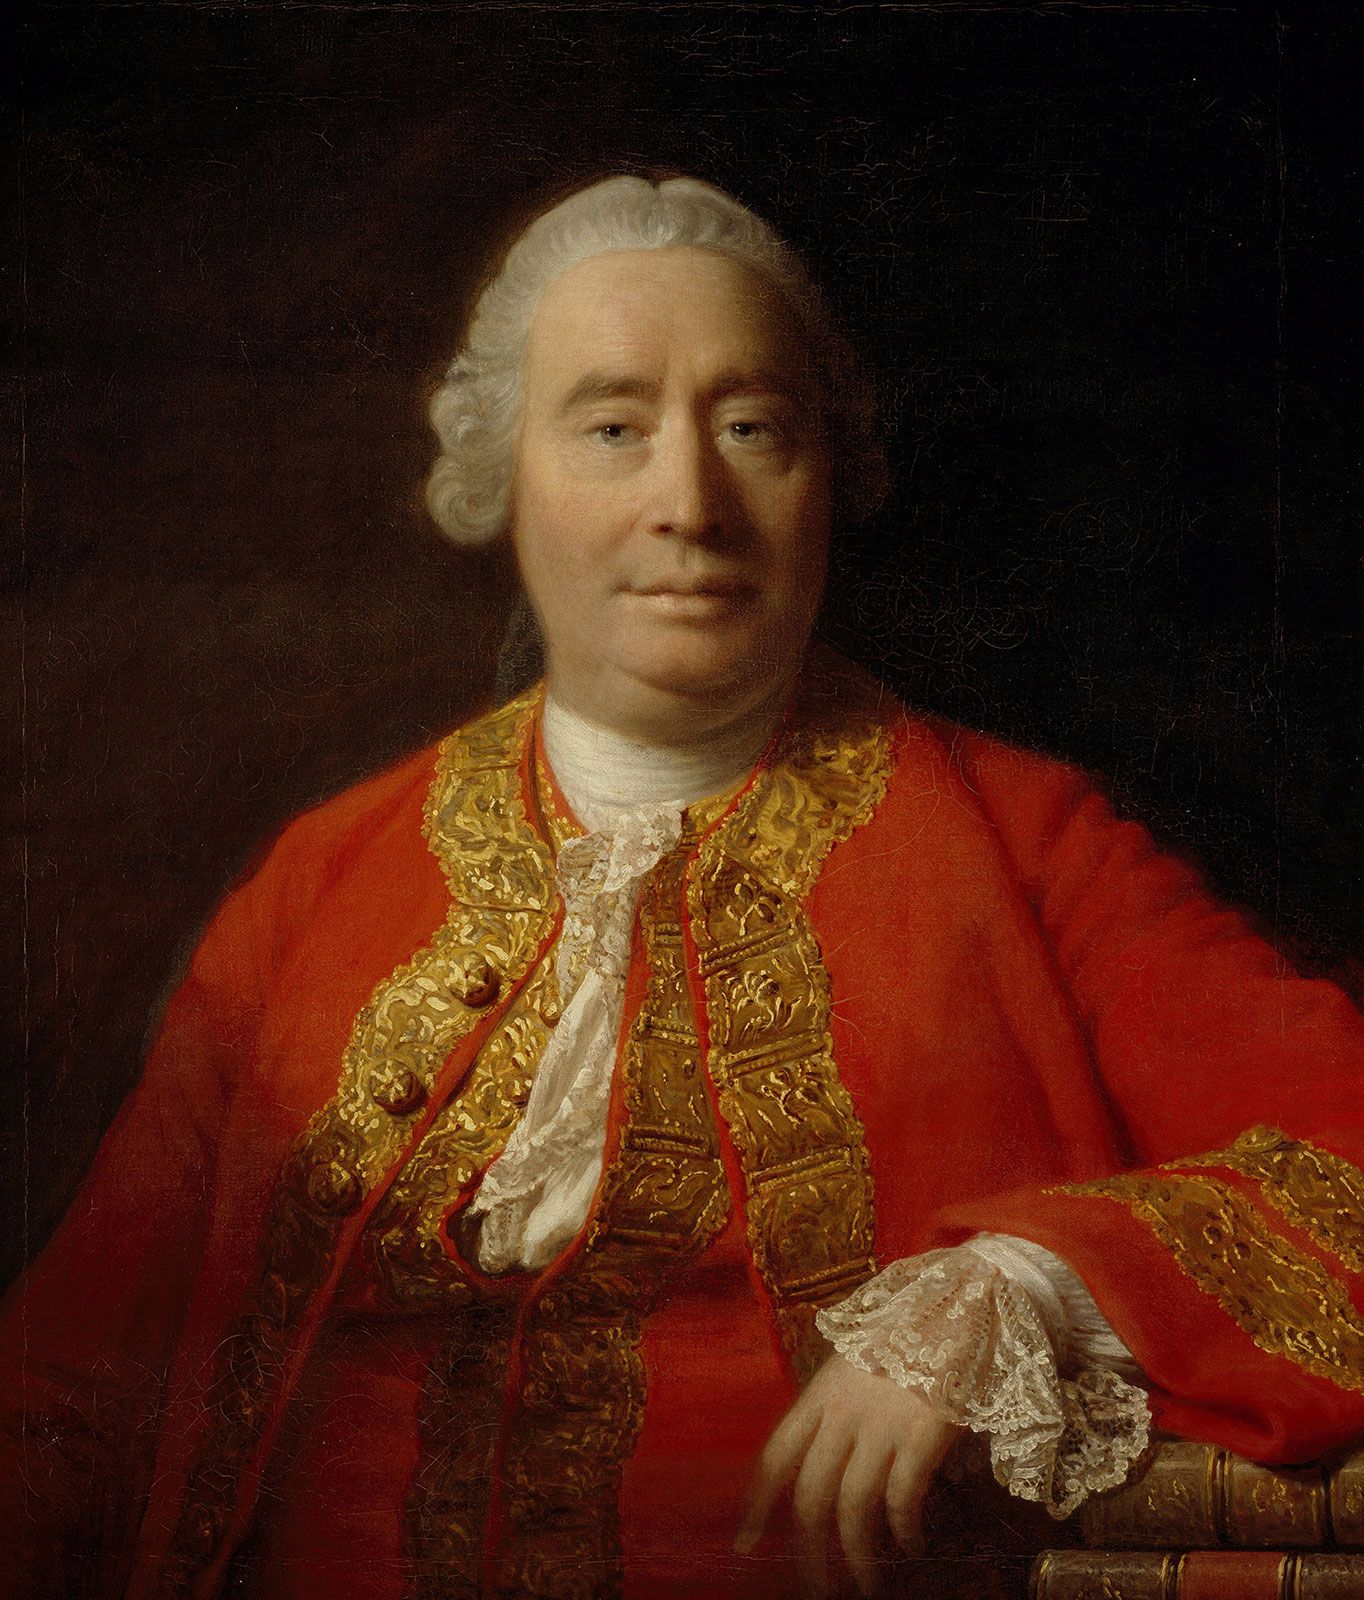 David Hume. Biography, Philosophy, Works, & Facts